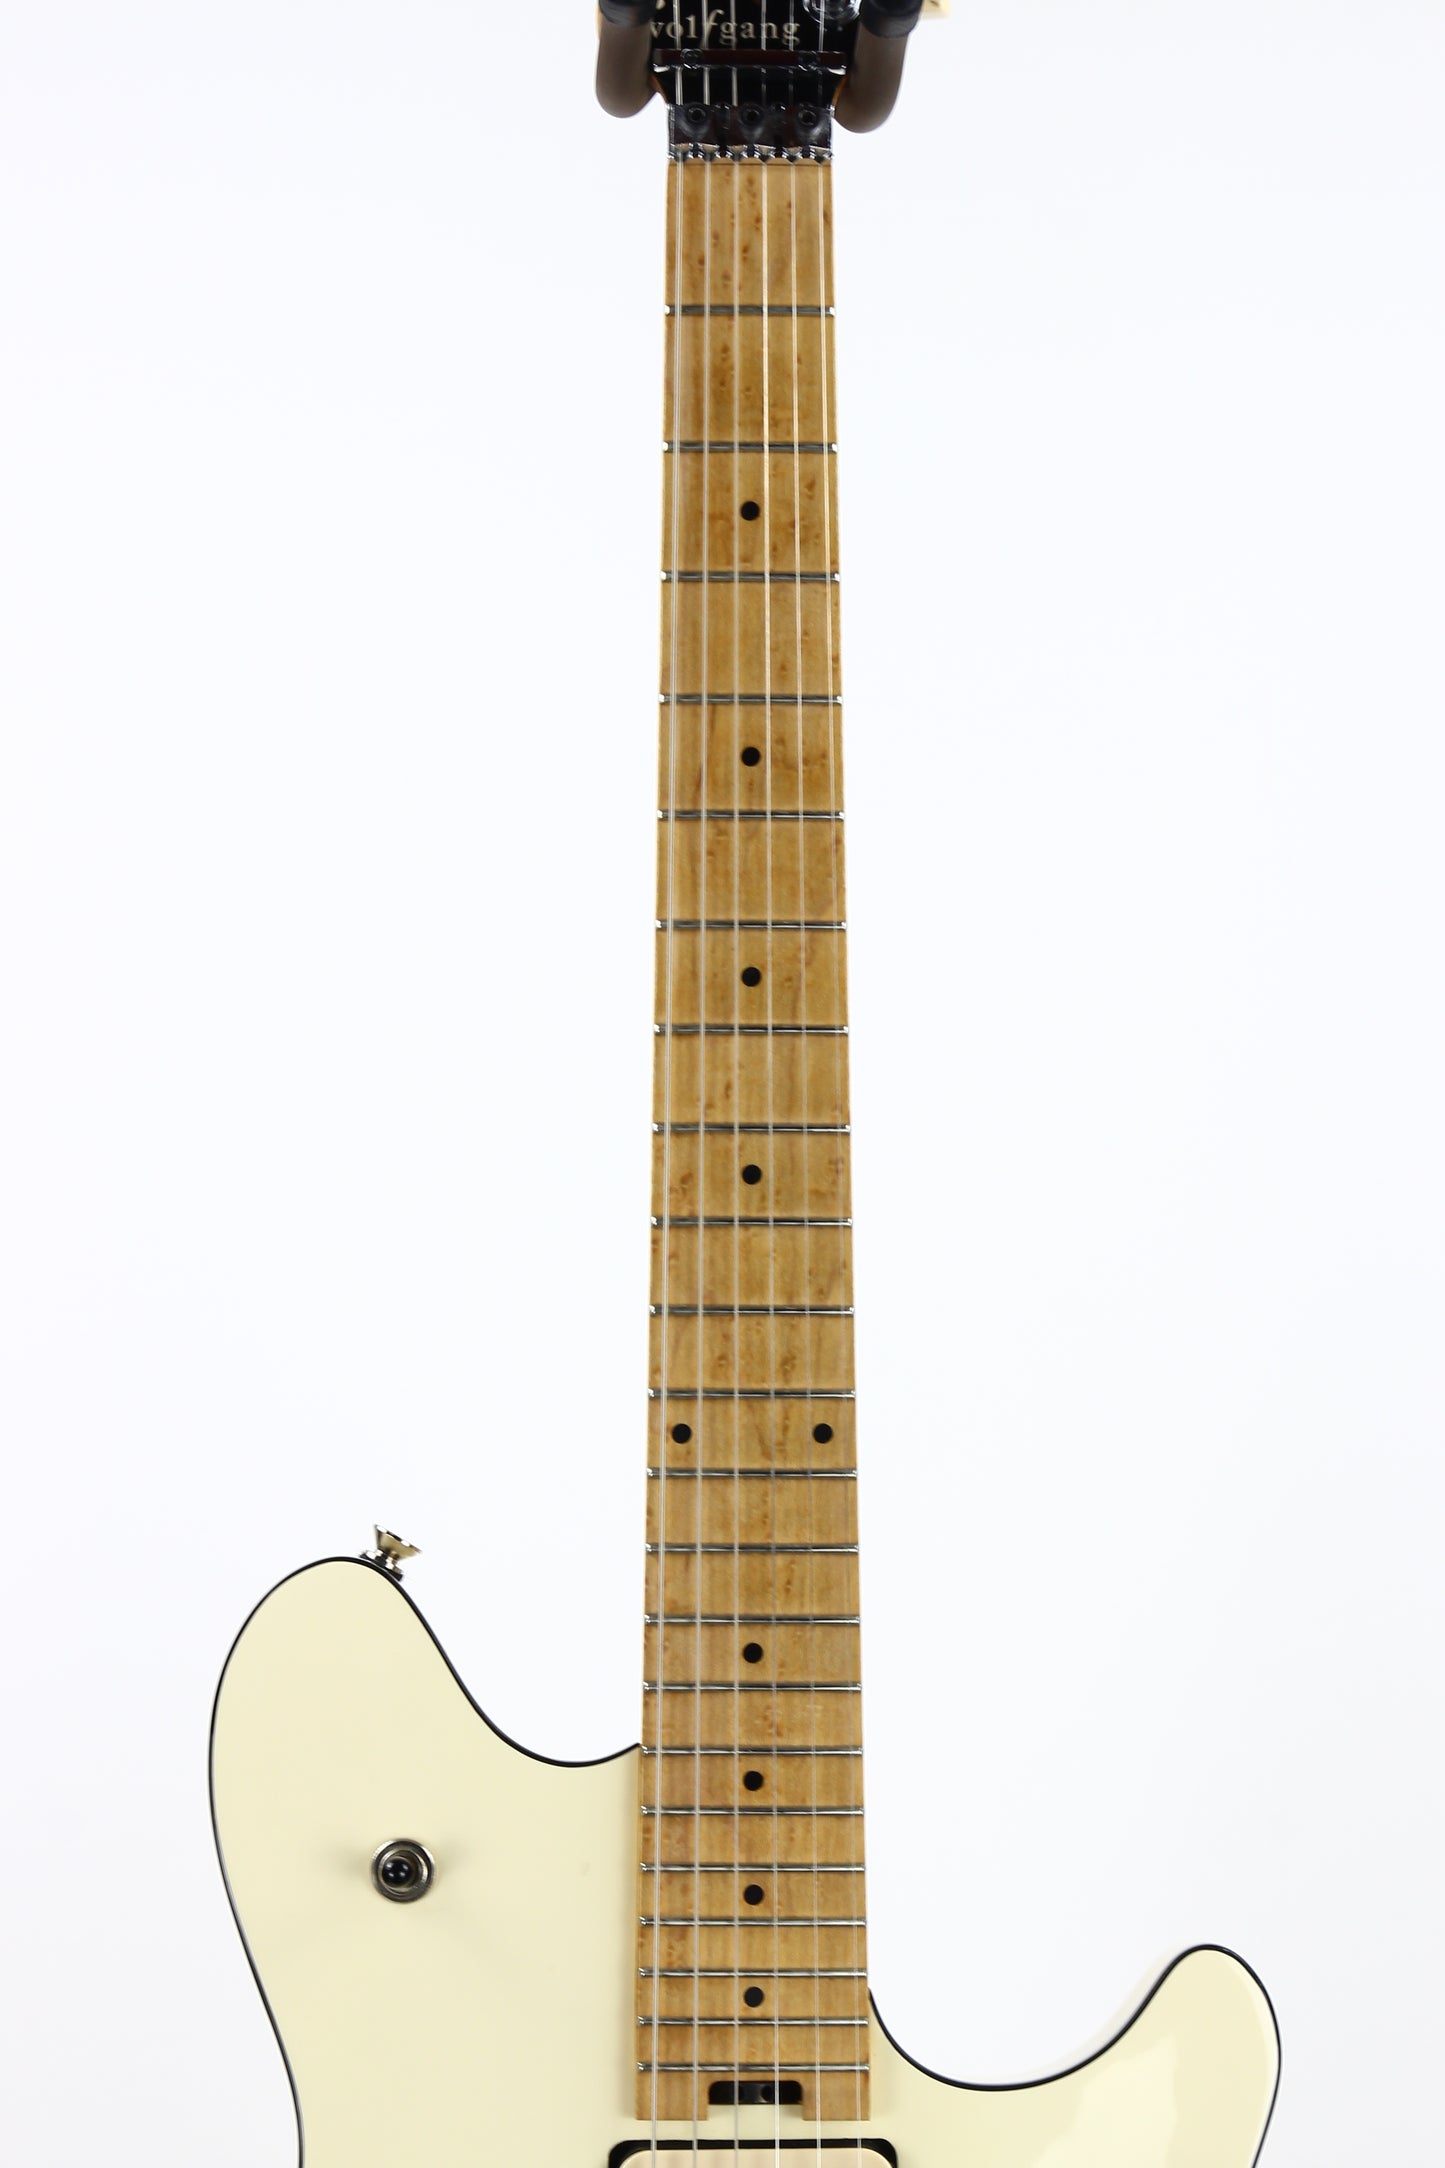 EARLY! 1996 Peavey EVH Wolfgang Standard PATENT PENDING Archtop -- VERY Early Model, Deluxe, White w Black Binding!